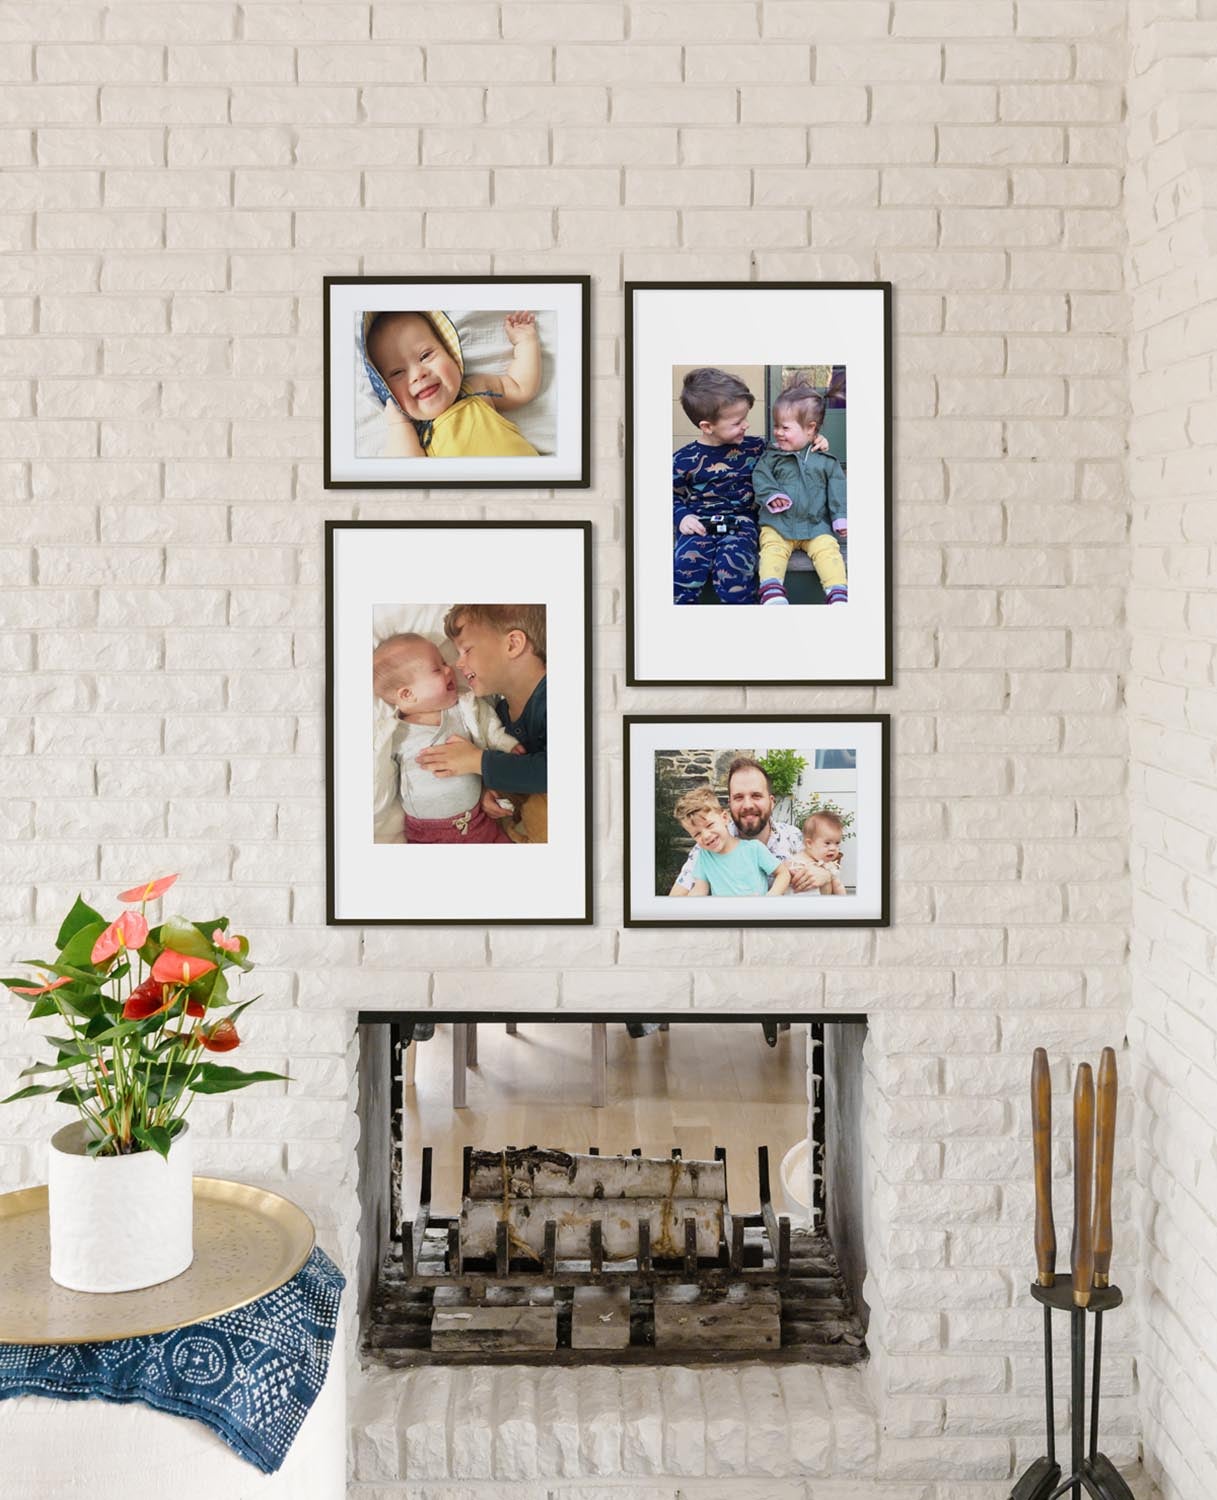 Personalized Wedding Background Picture Frame for 5 x 7 Photo 12 x 12 Overall Size 